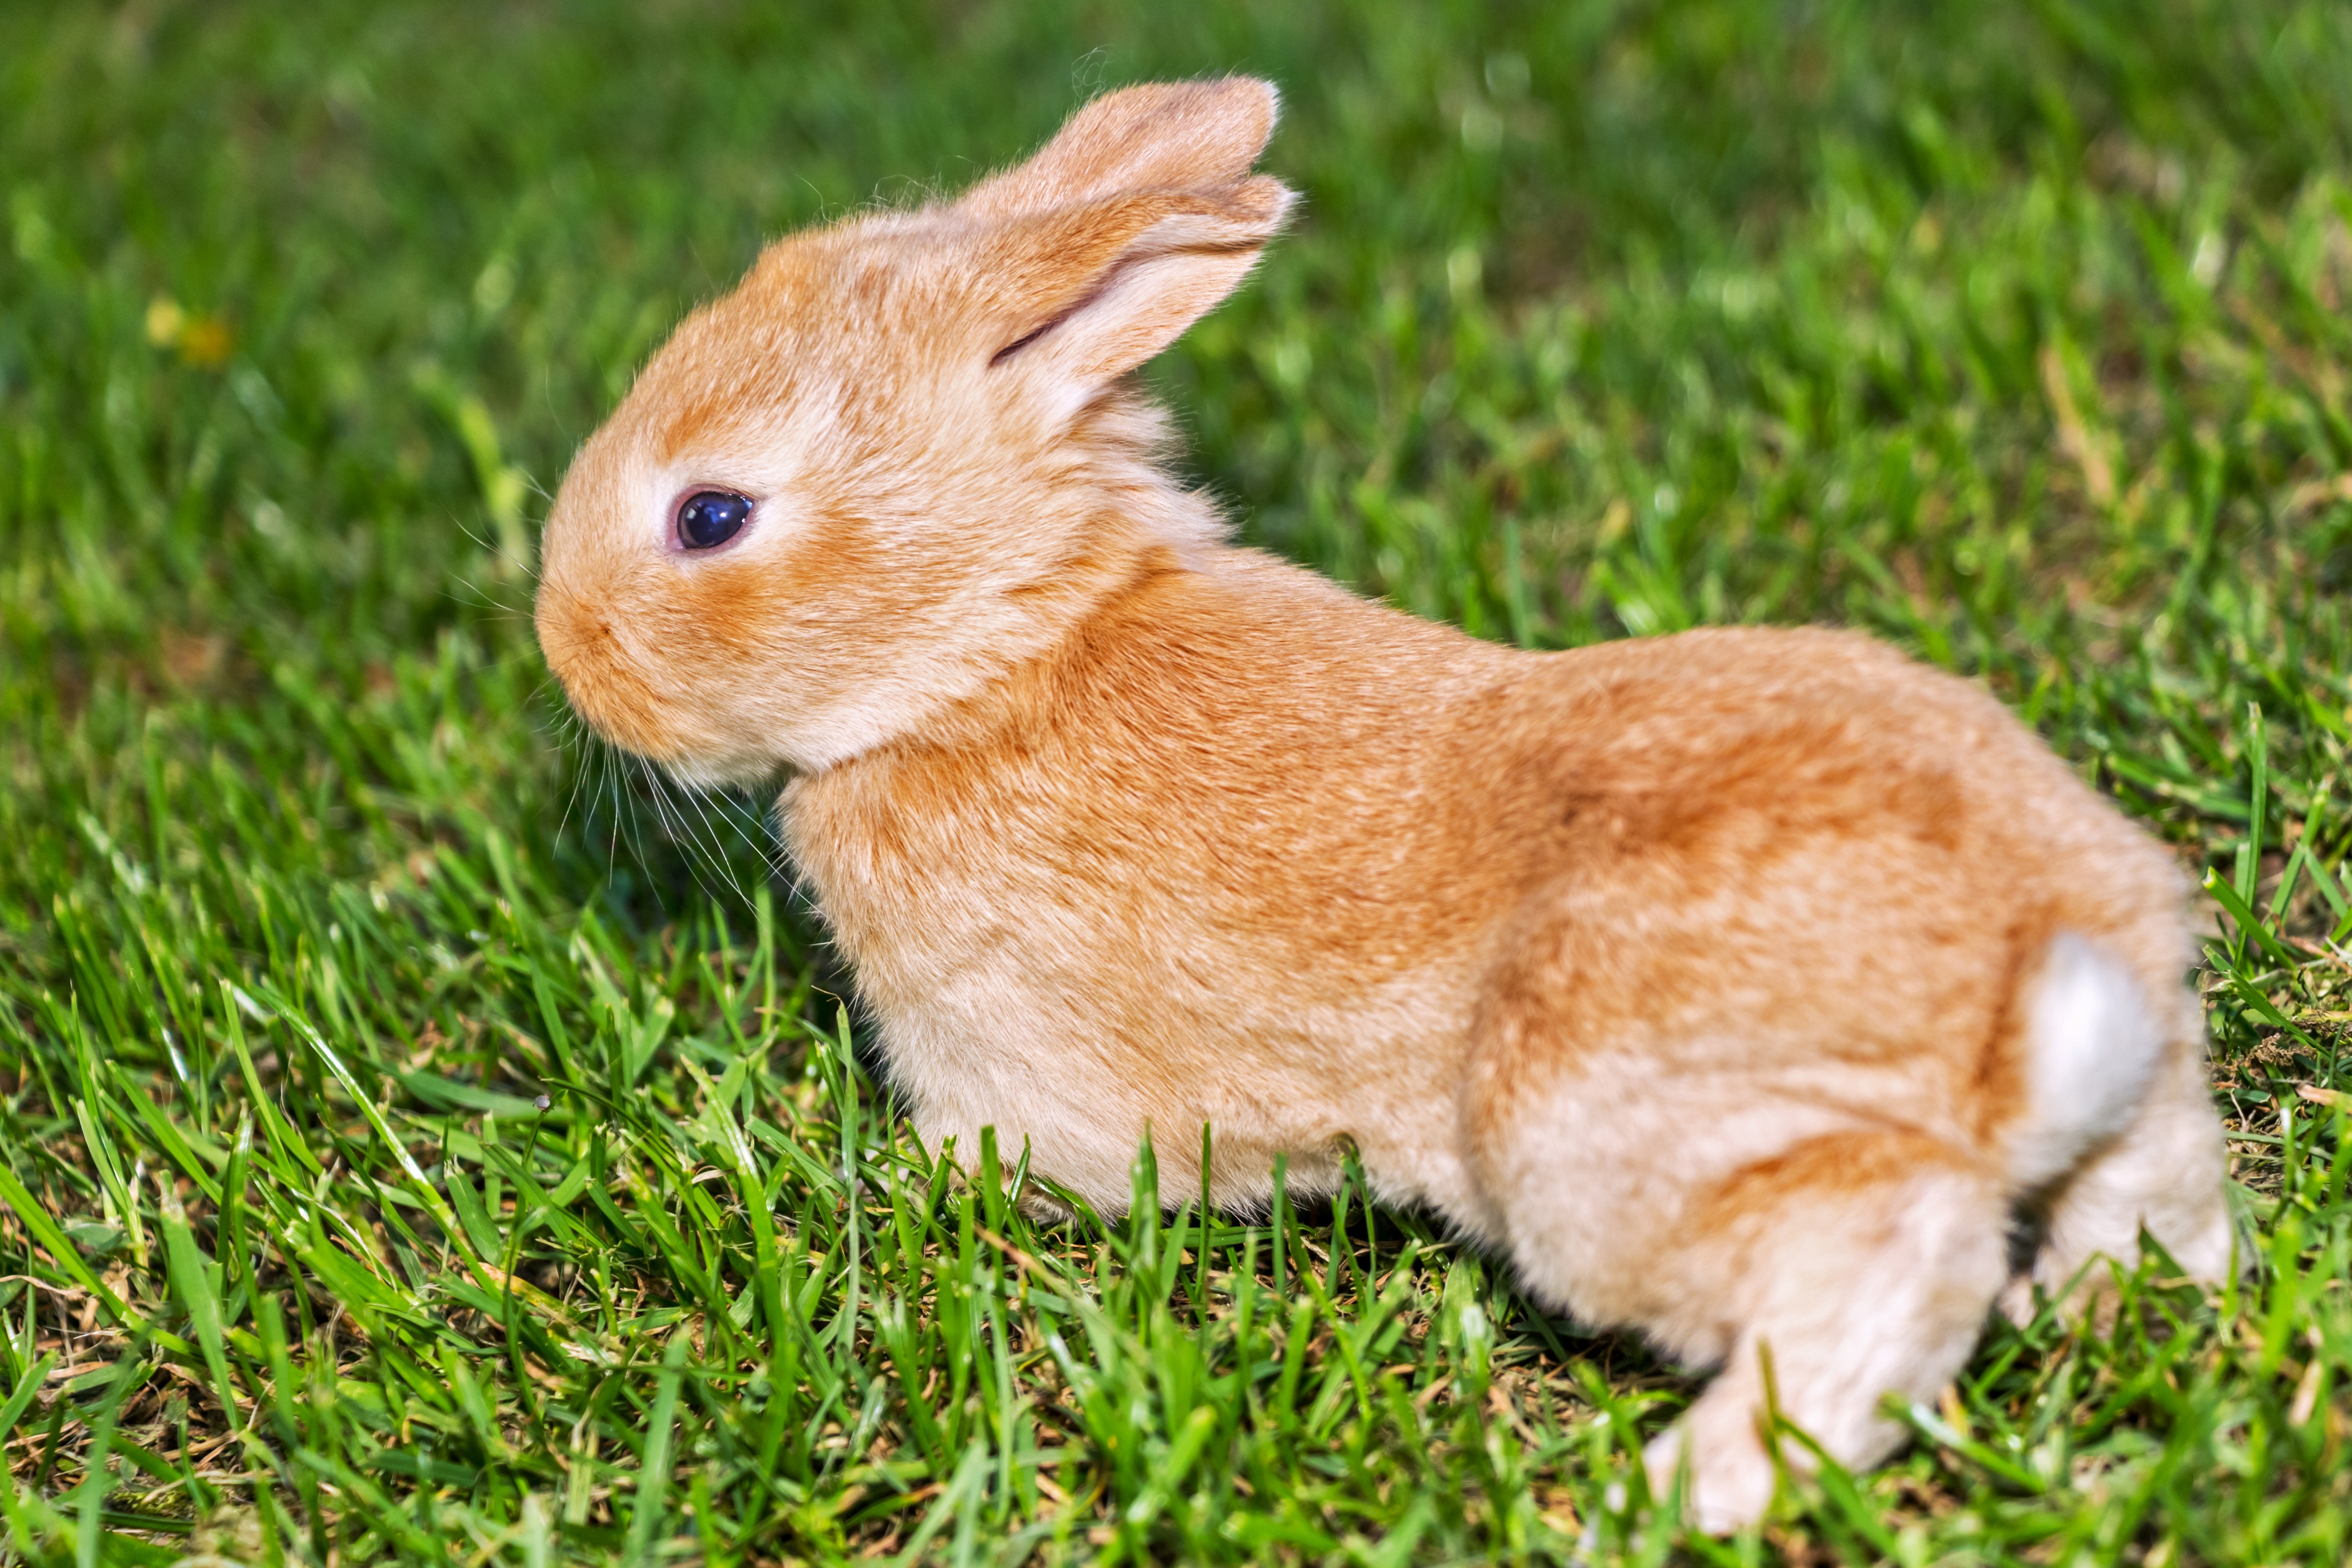 A pet rabbit on the lawn